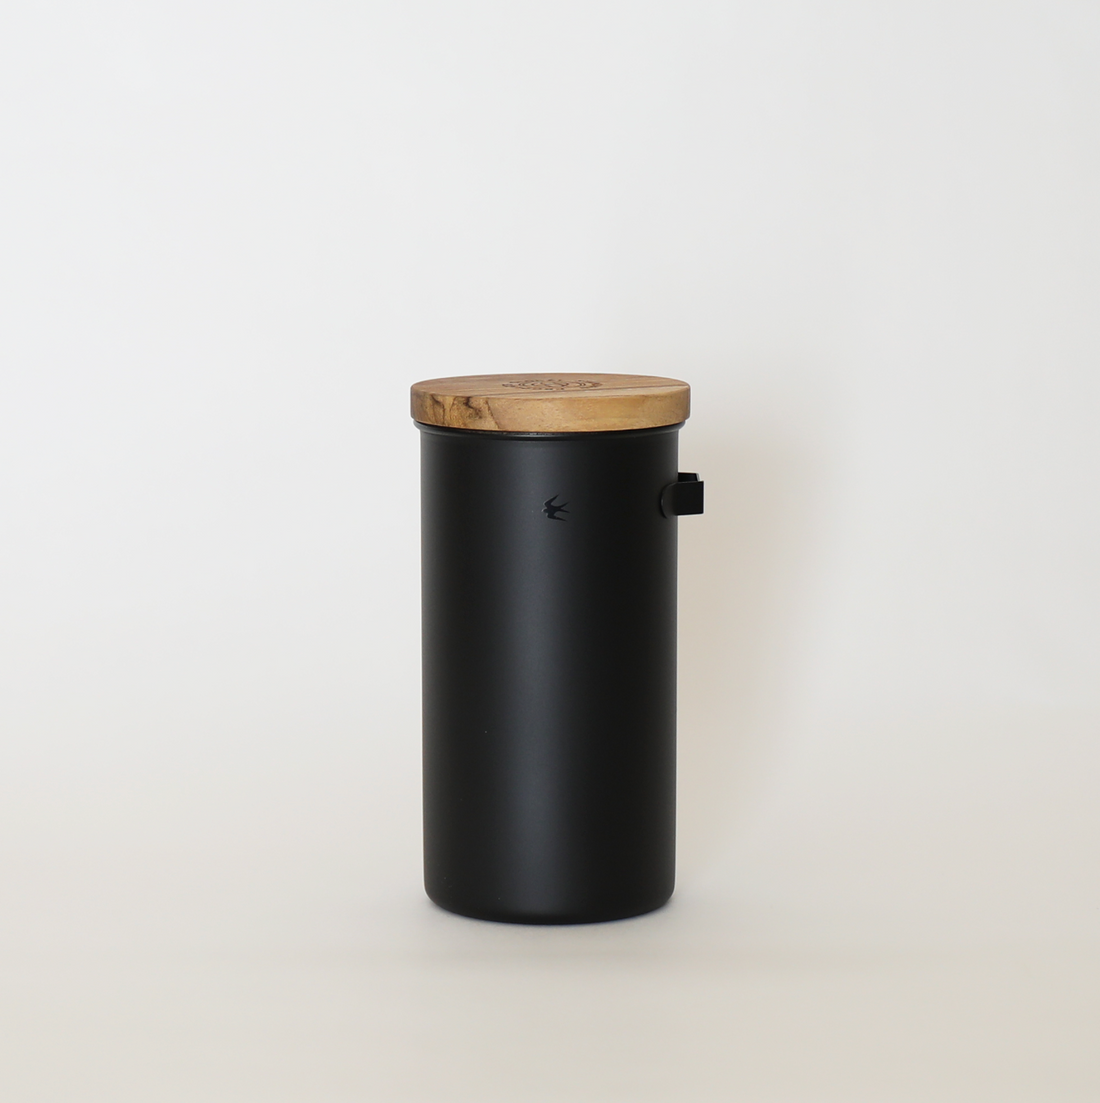 TSUBAME Canister with Hook & Spoon - Black